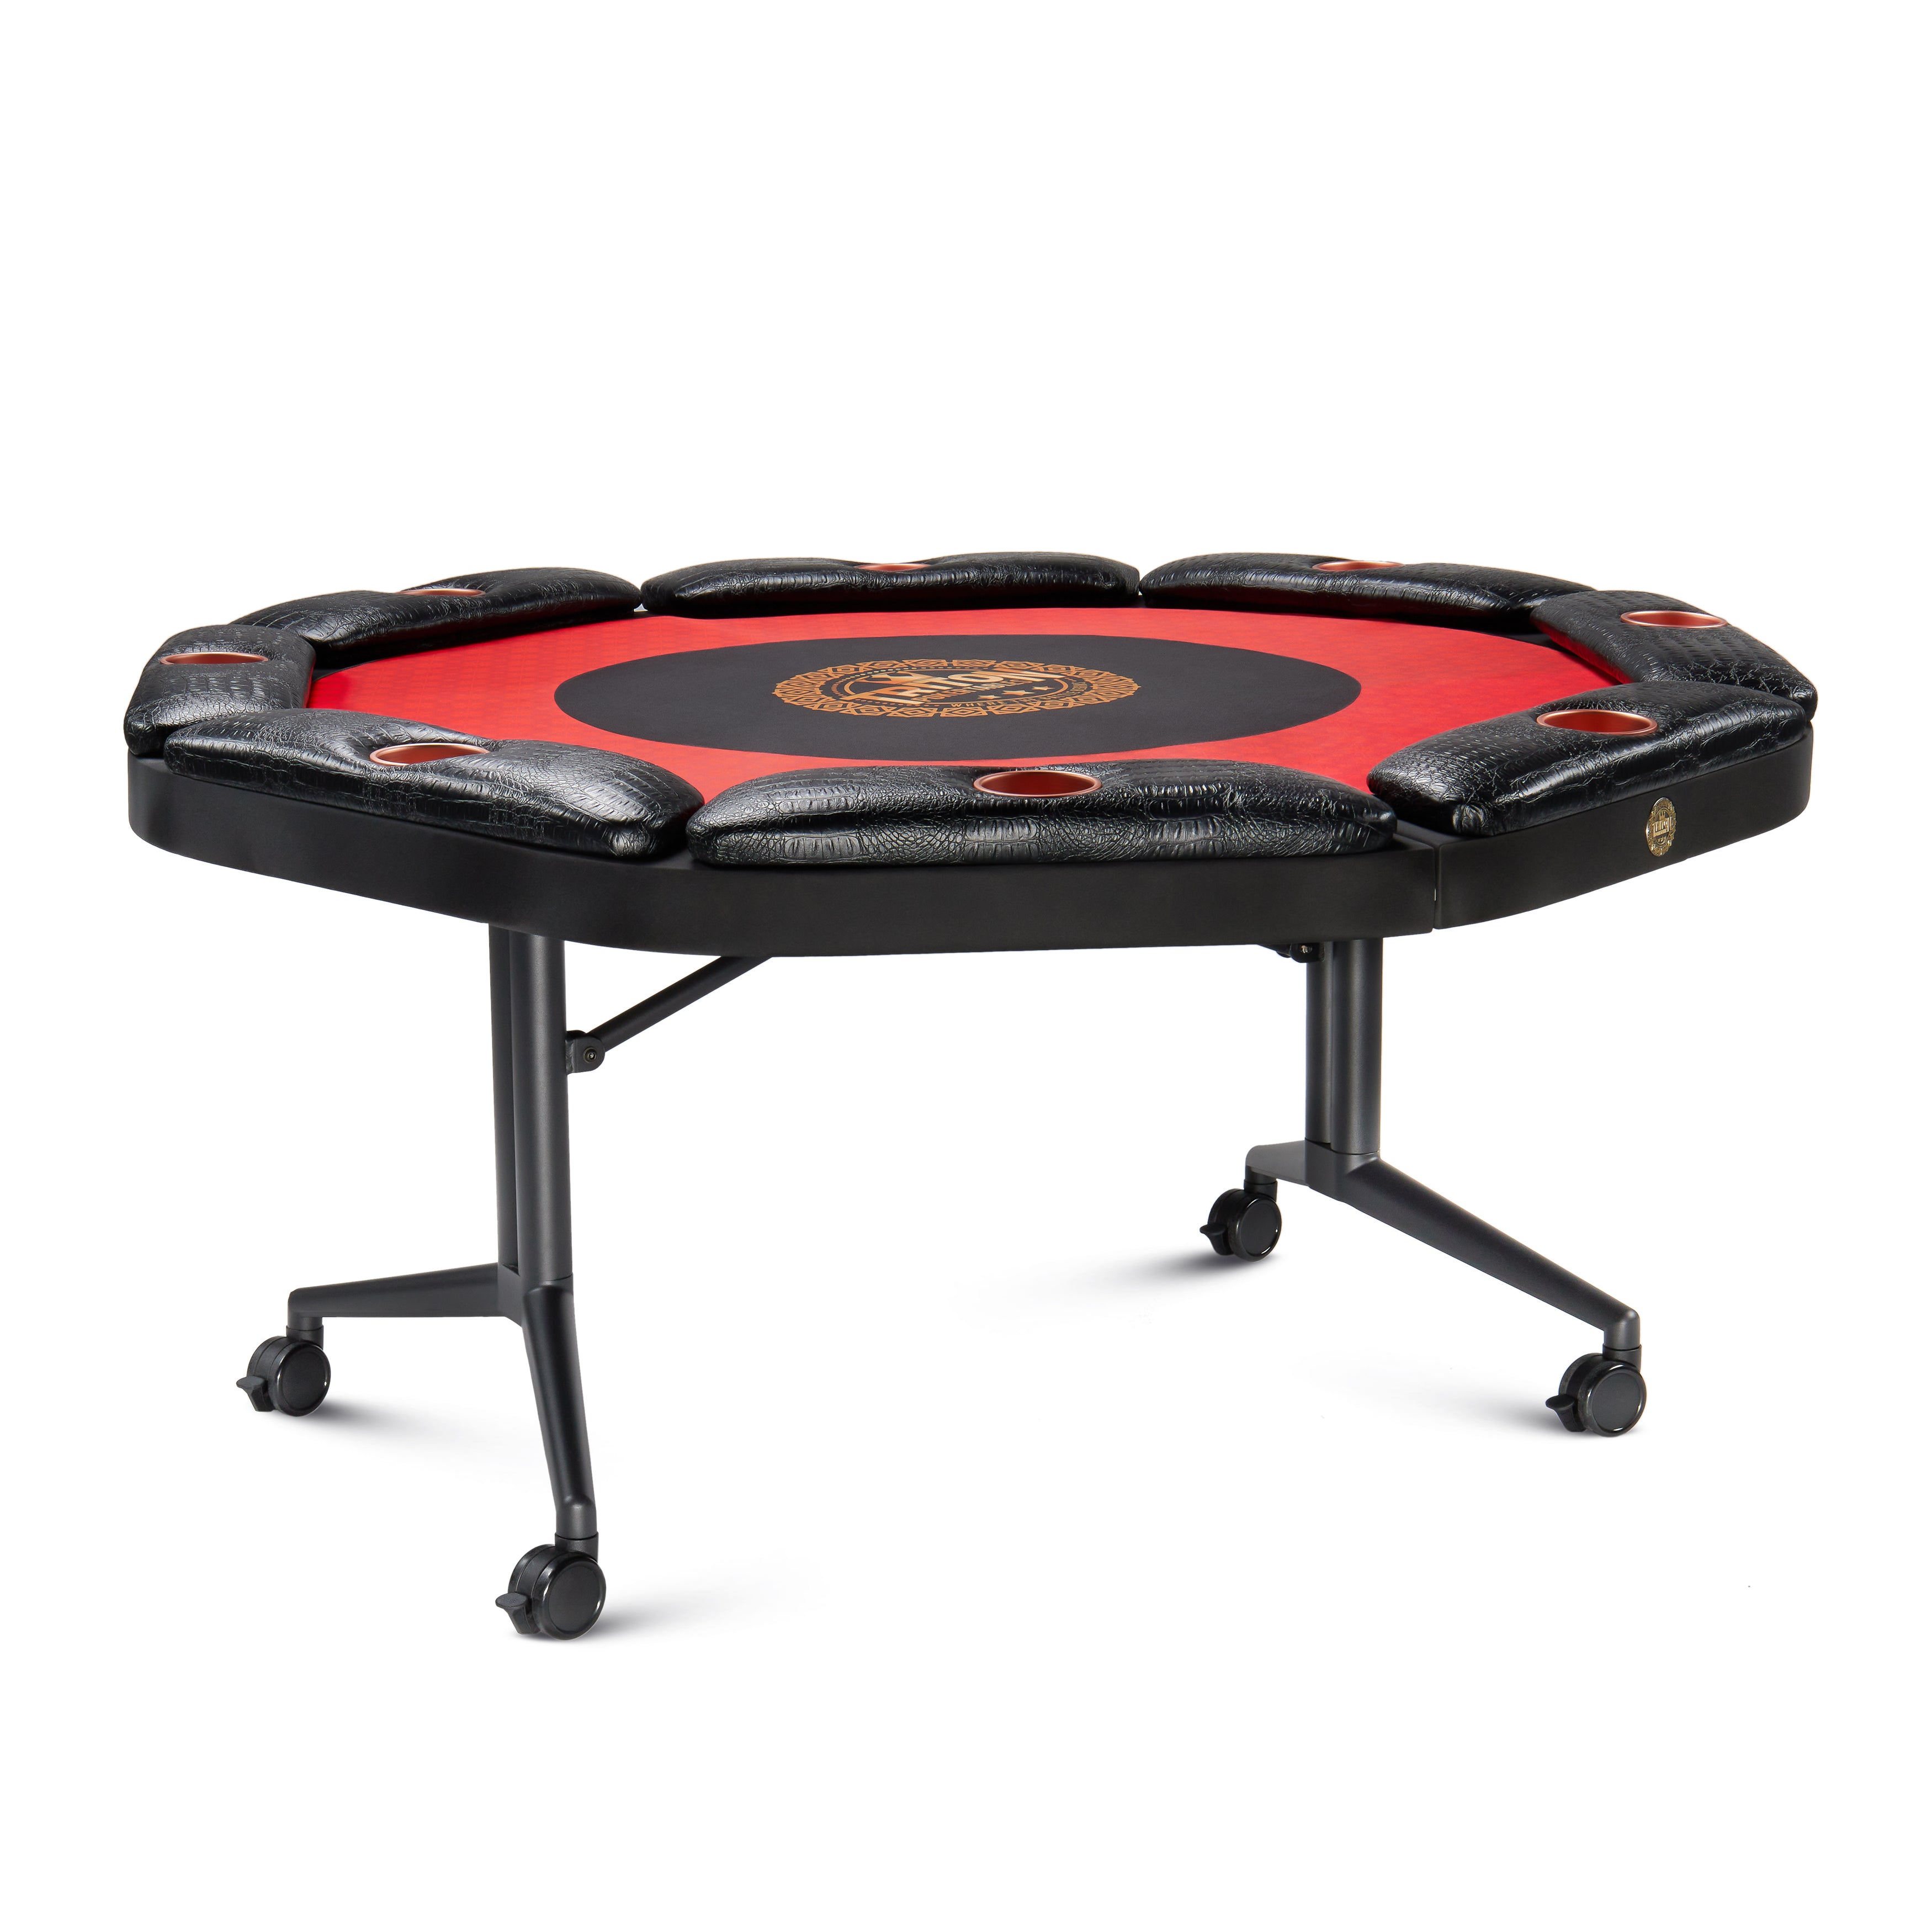 8 PLAYER POKER TABLE + 8 CHAIRS + 1 EXTRA MAT